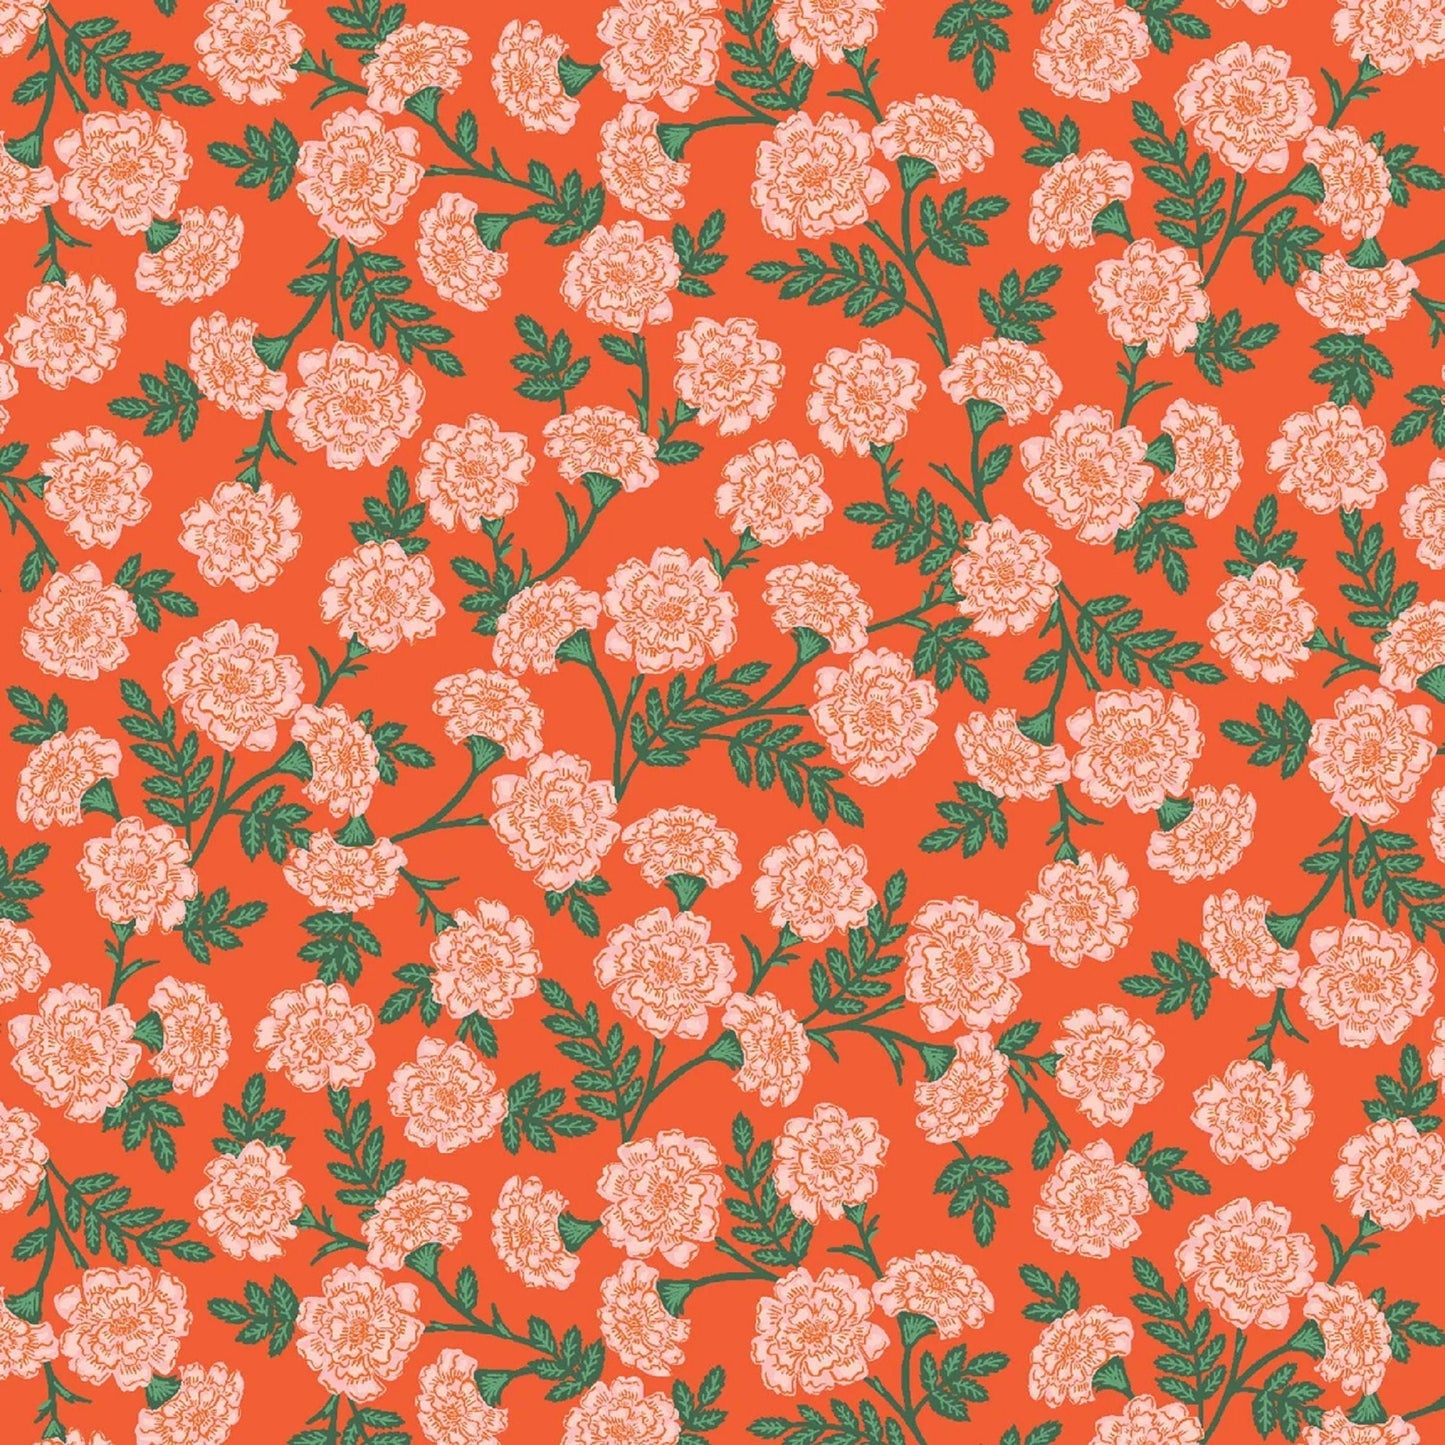 Dianthus Red Bramble Anna Bond Rifle Paper Co Cotton + Steel 100% Quilters Cotton Fabric Fetish